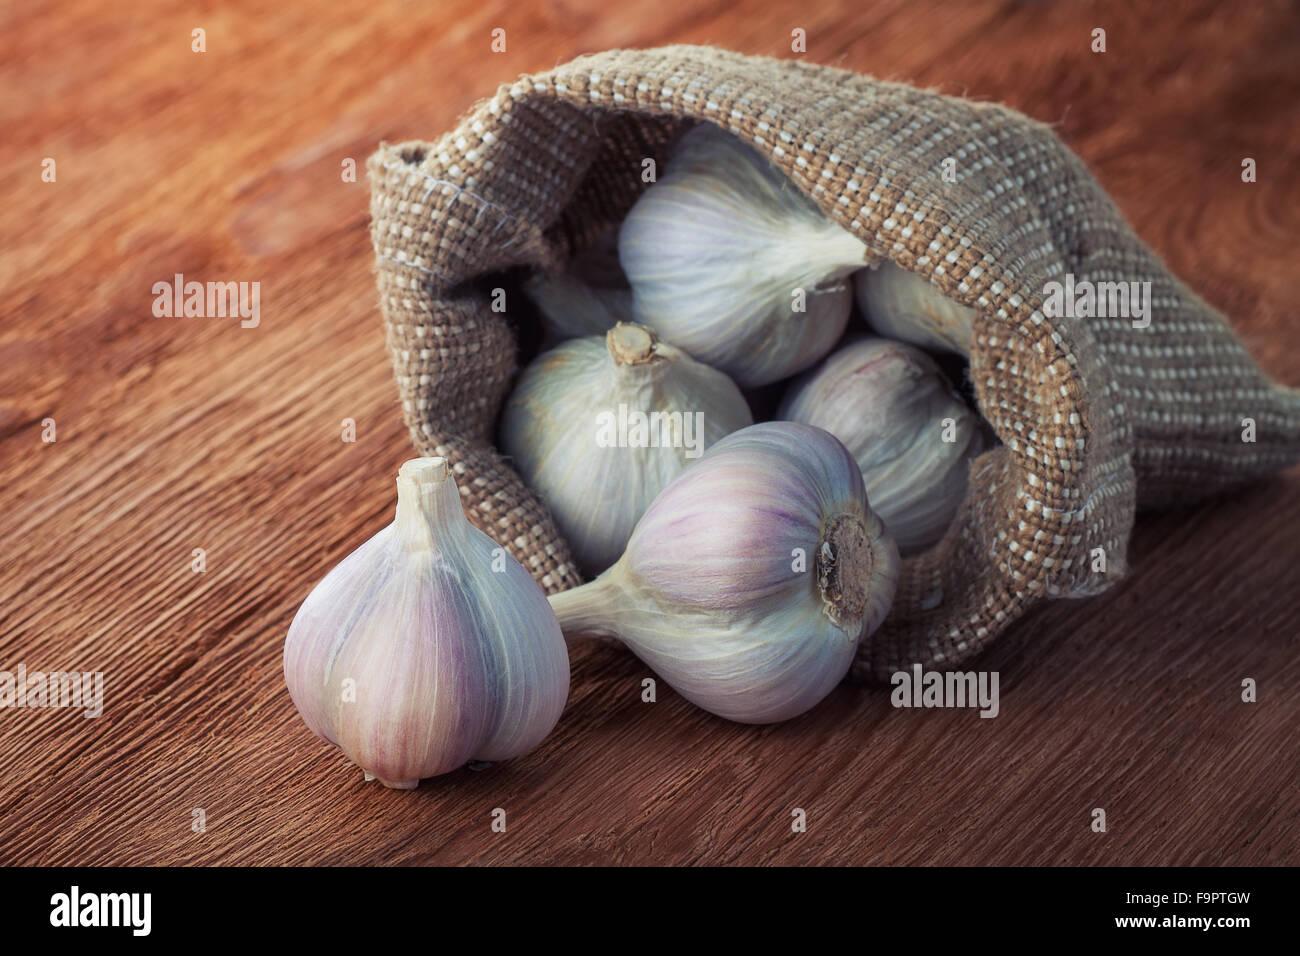 fragrant ripe garlic in a bag of coarse cloth on wooden table Stock Photo